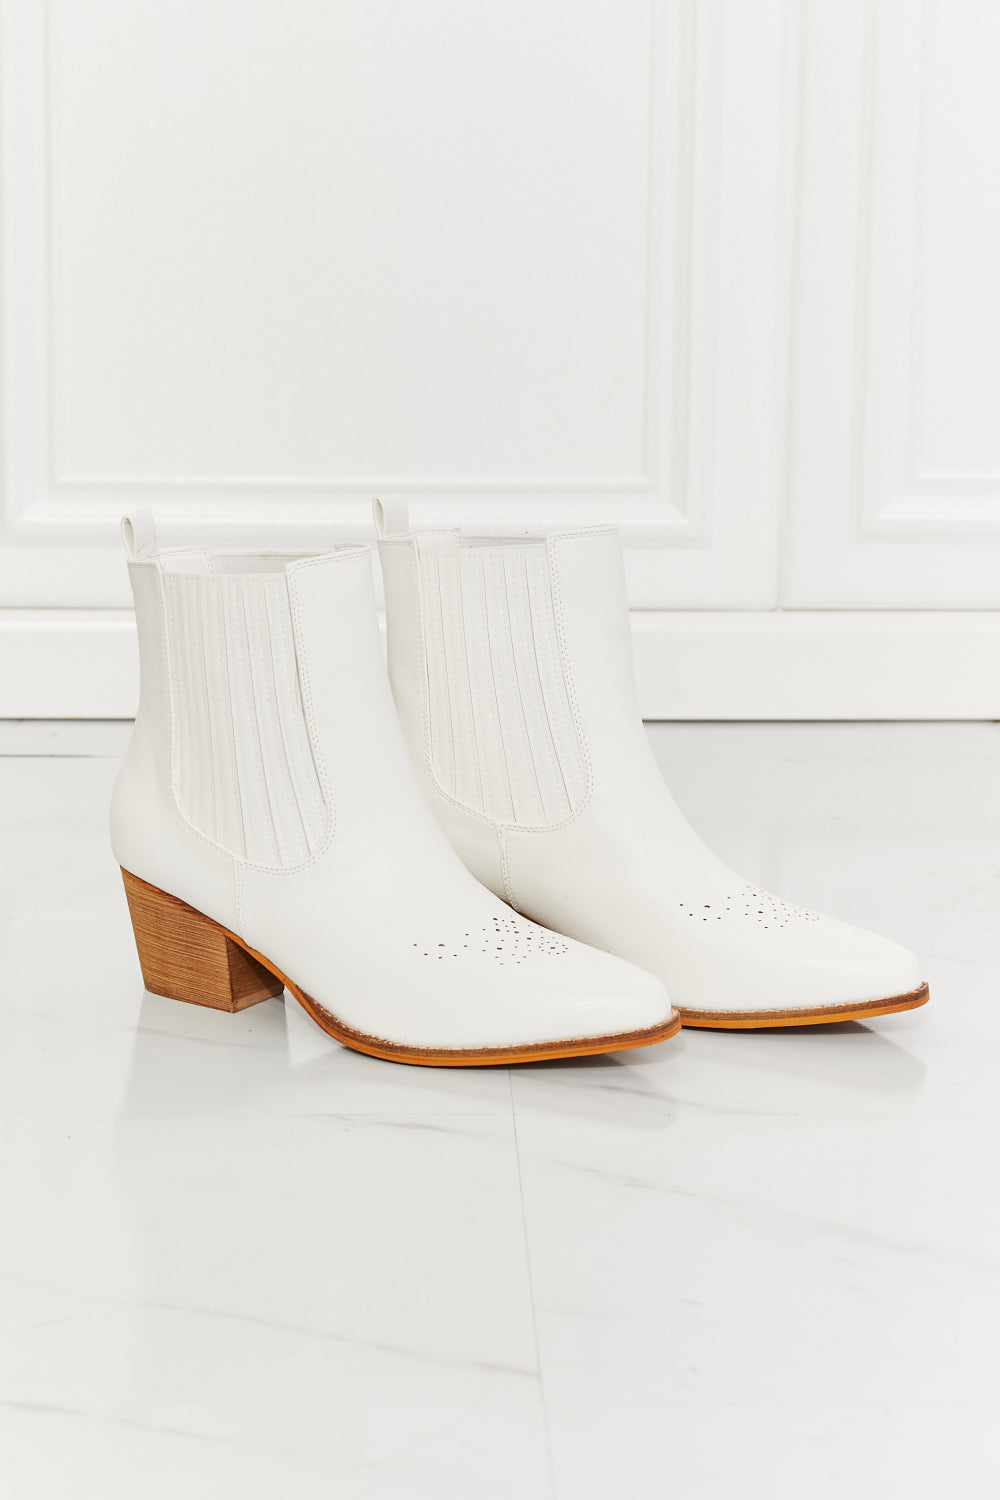 MMShoes Love the Journey Stacked Heel Chelsea Boot in White - Tigbul's Fashion